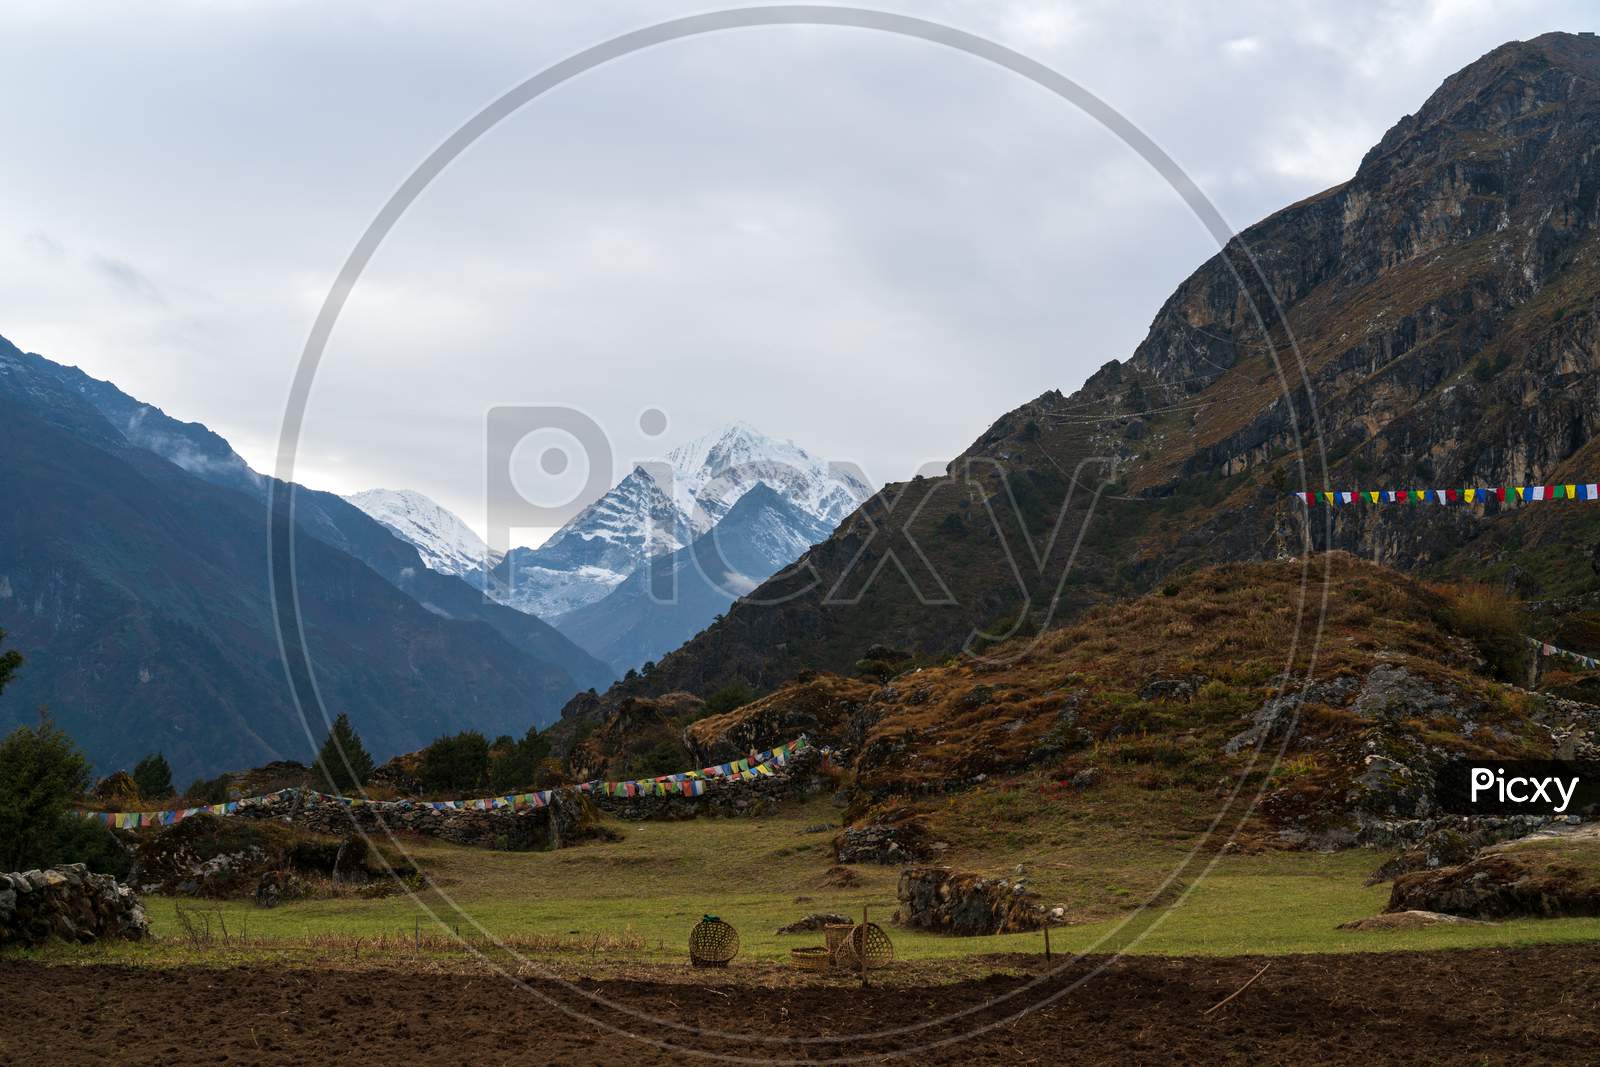 Fields in the high himalayas and mountains in the distance